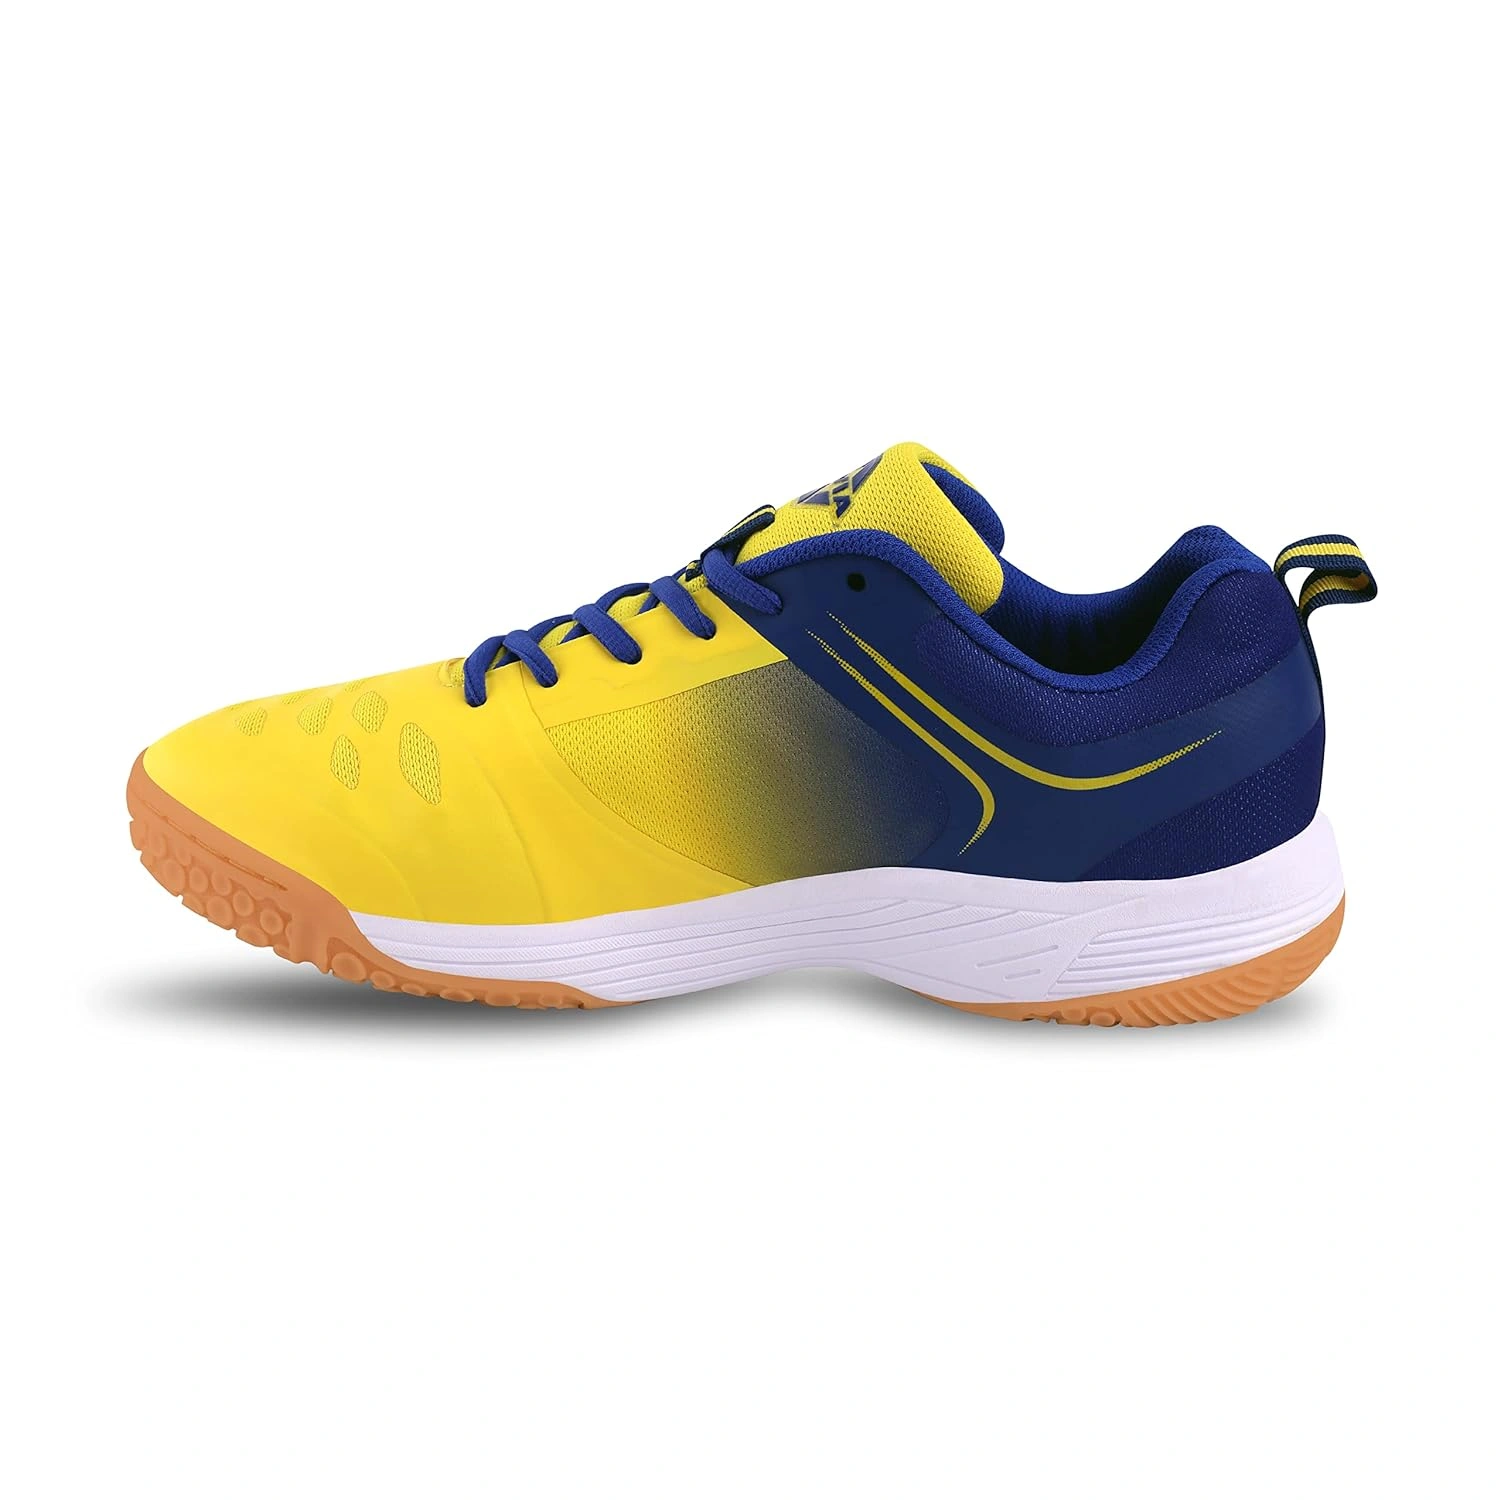 Nivia Hy-court 2.0 Badminton Shoes For Mens-52572